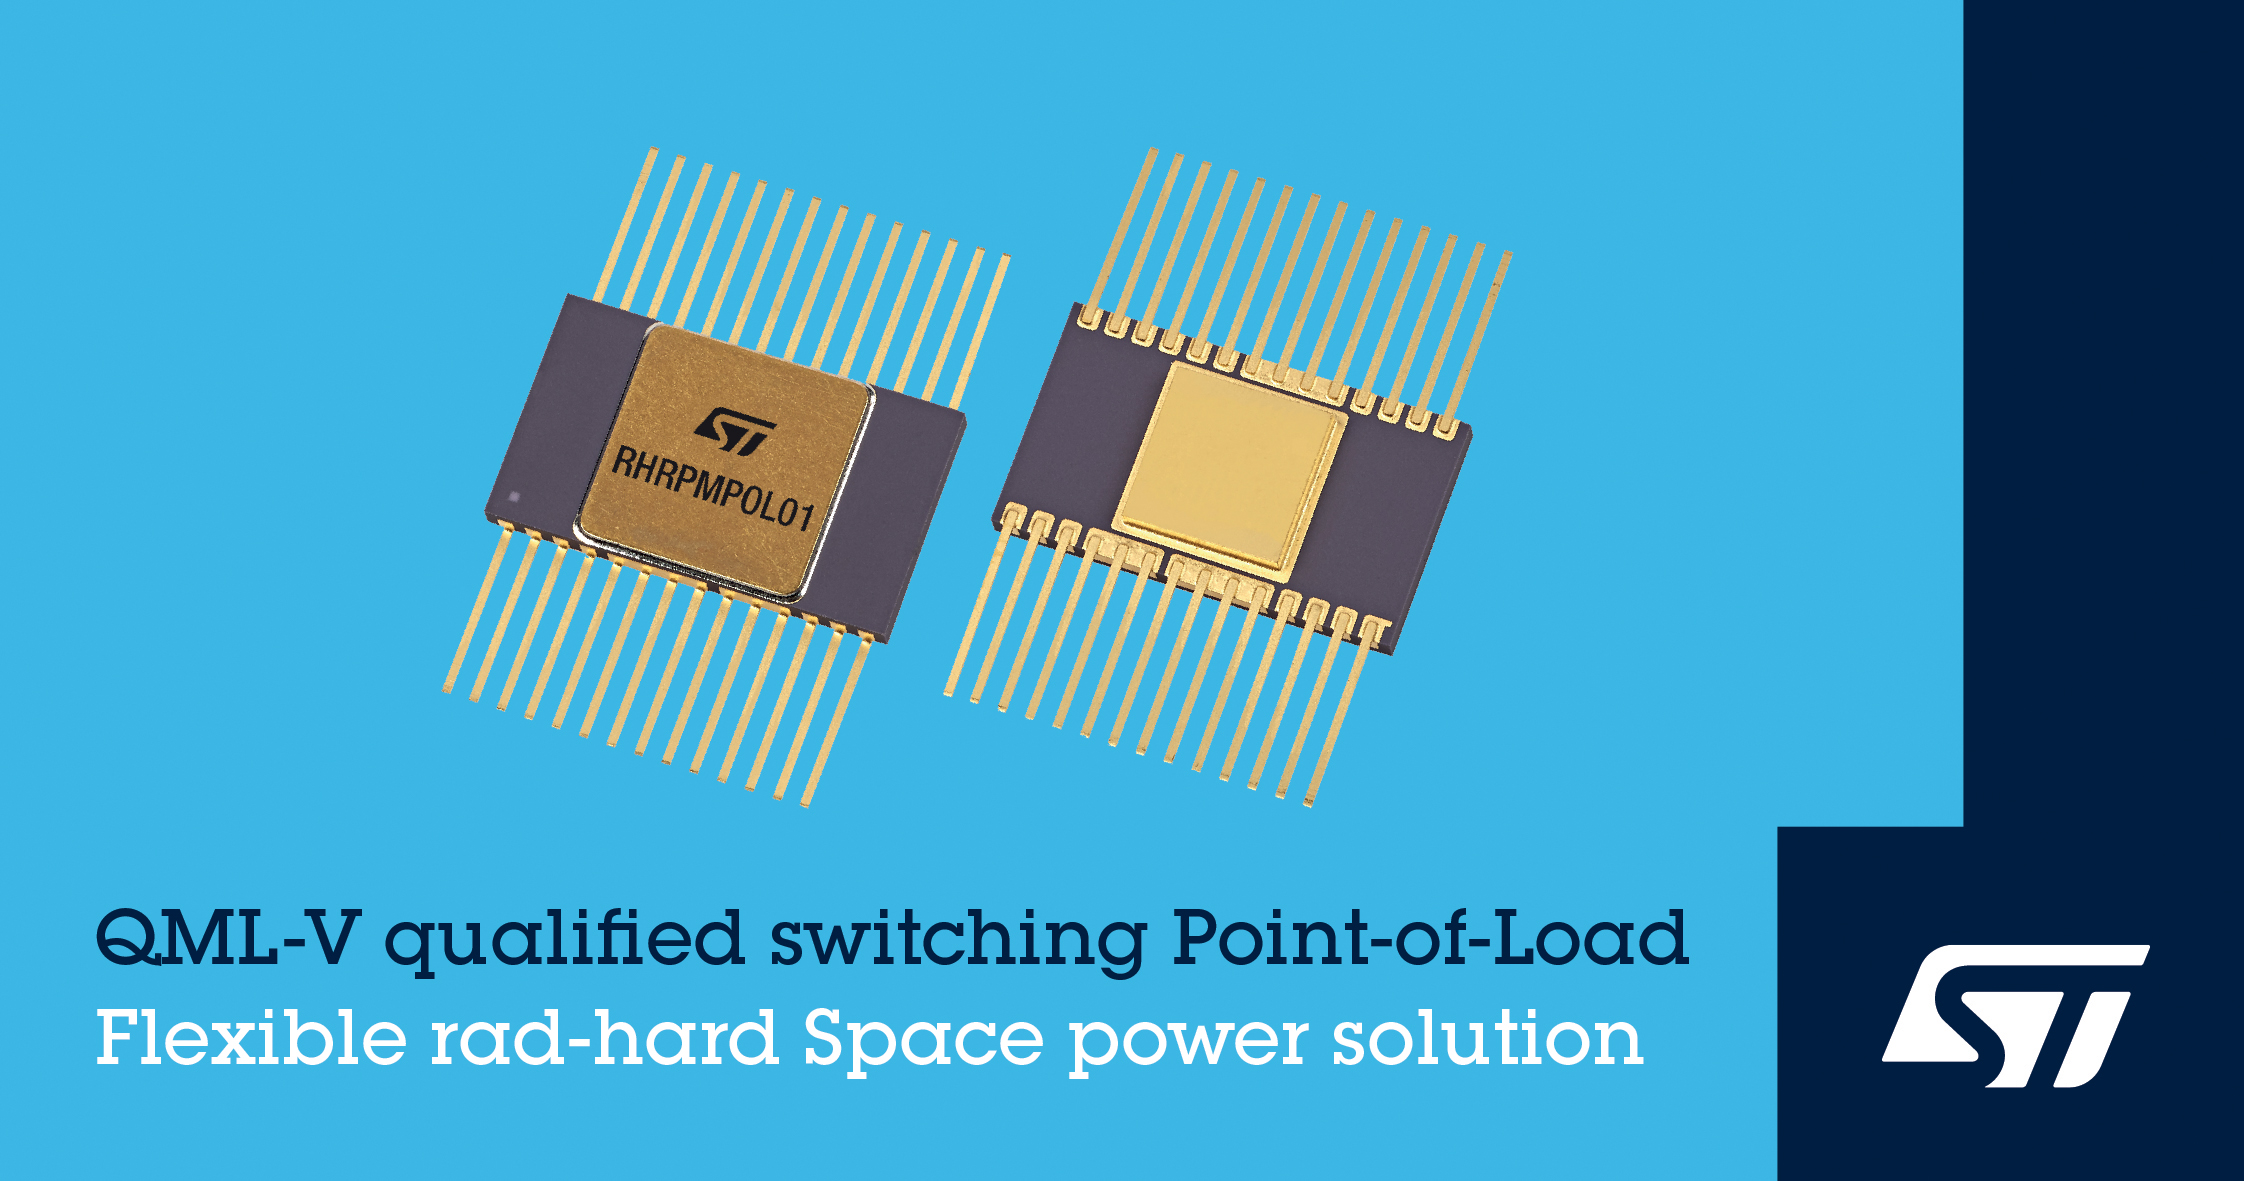 STMicroelectronics Extends Space-Qualified Power Portfolio with Highly Integrated Configurable Point-of-Load Converter